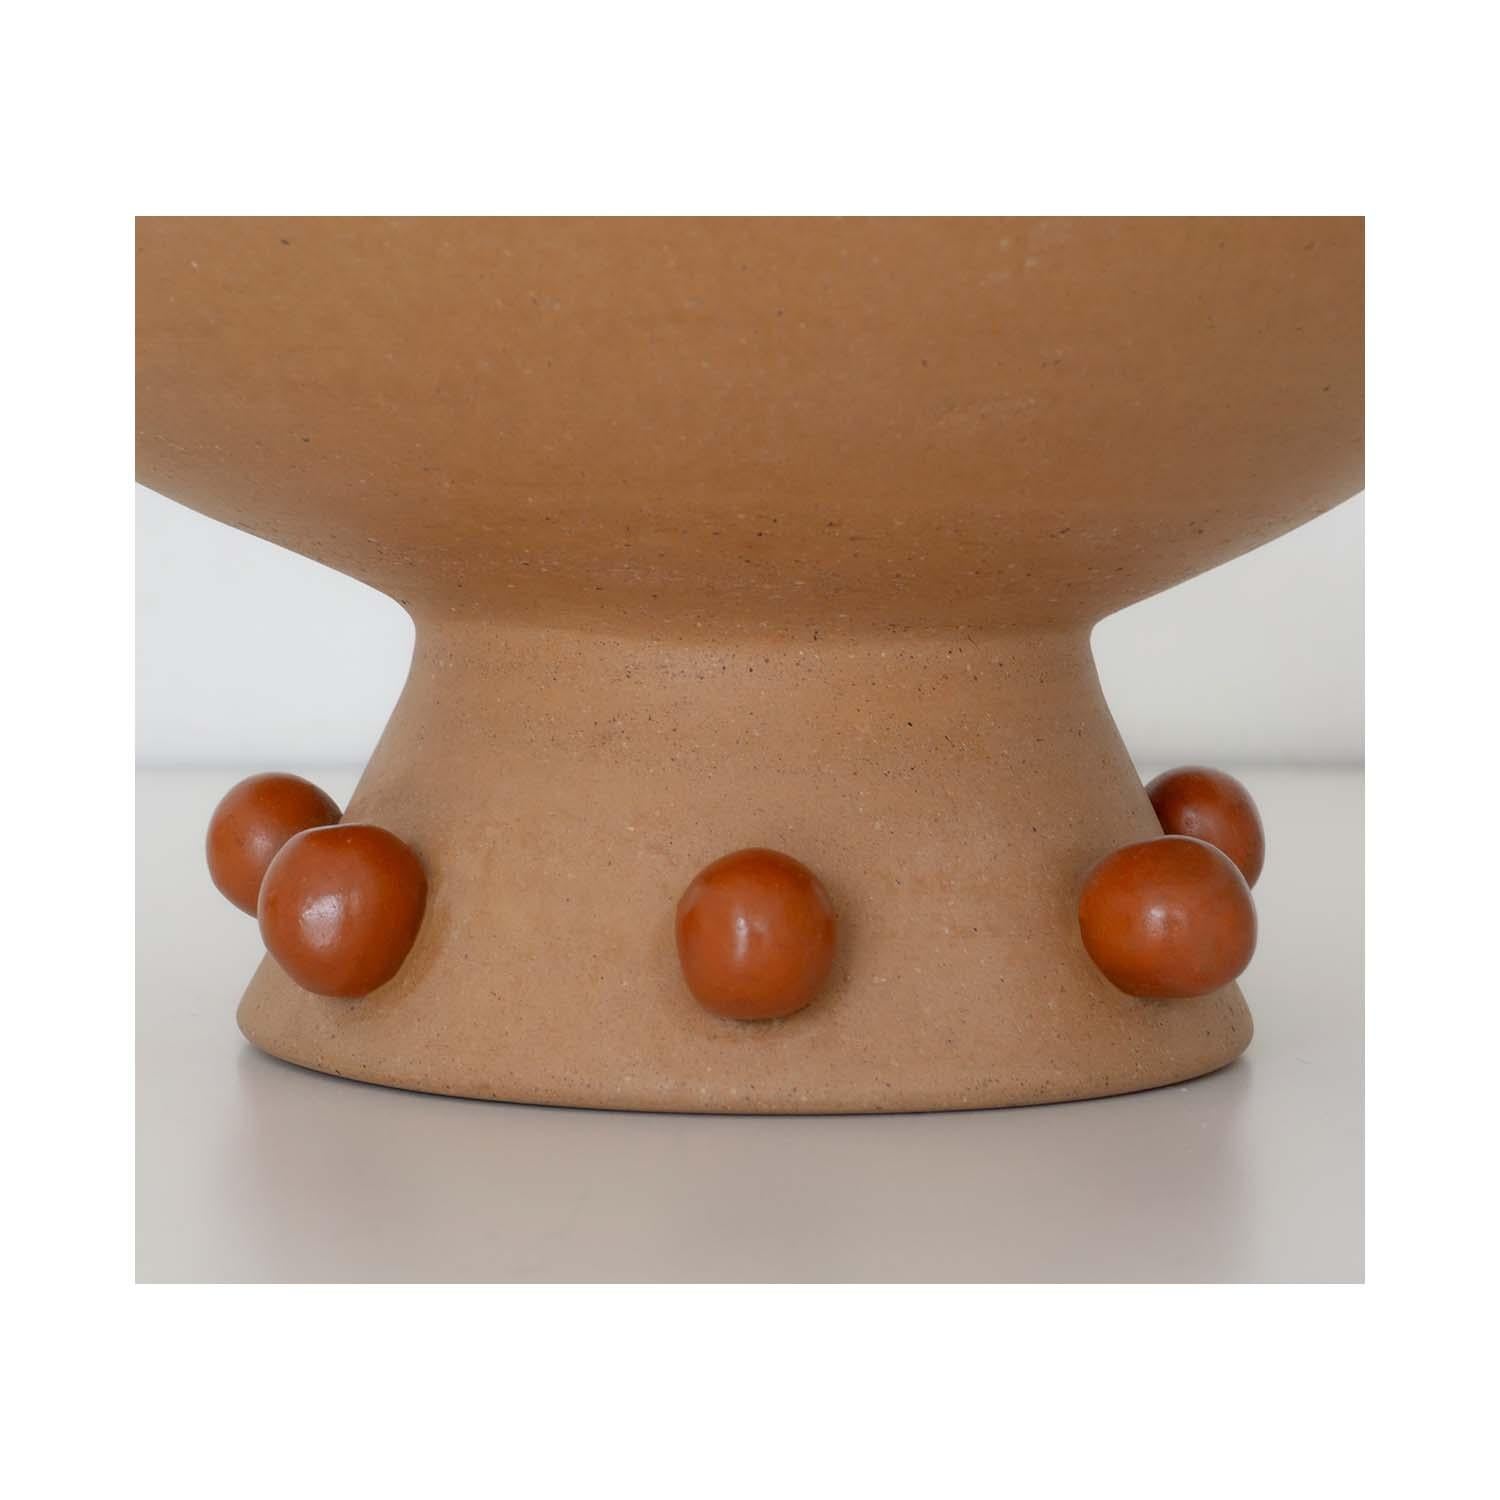 Contemporary Decorative Clay Bowl/Vase Danzante 01. Smooth Soft Clay Finish. By Raíz Mx For Sale